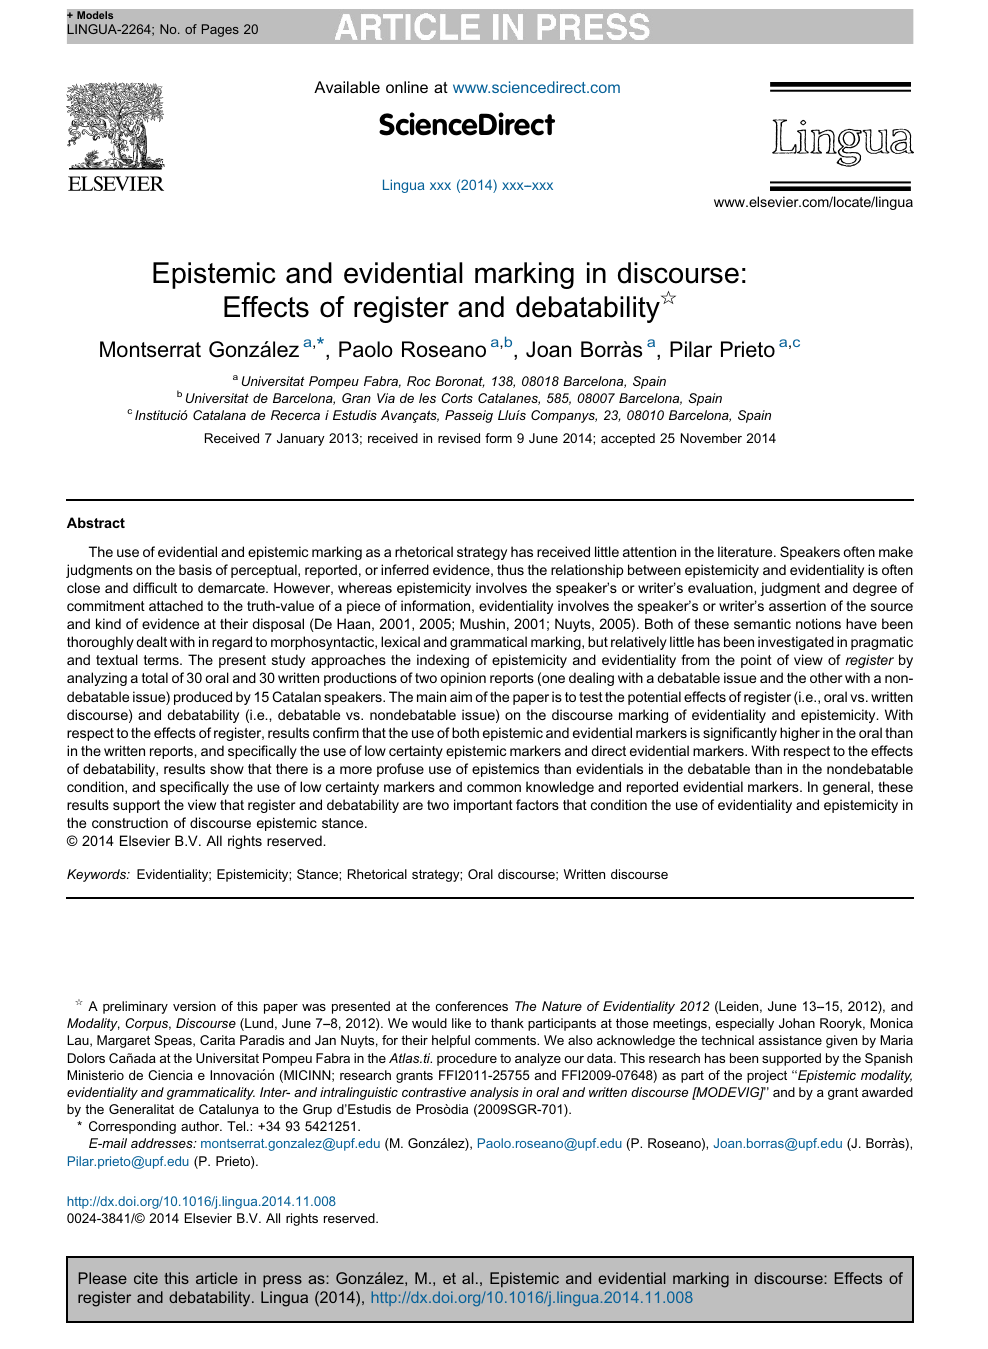 Epistemic And Evidential Marking In Discourse Effects Of Register